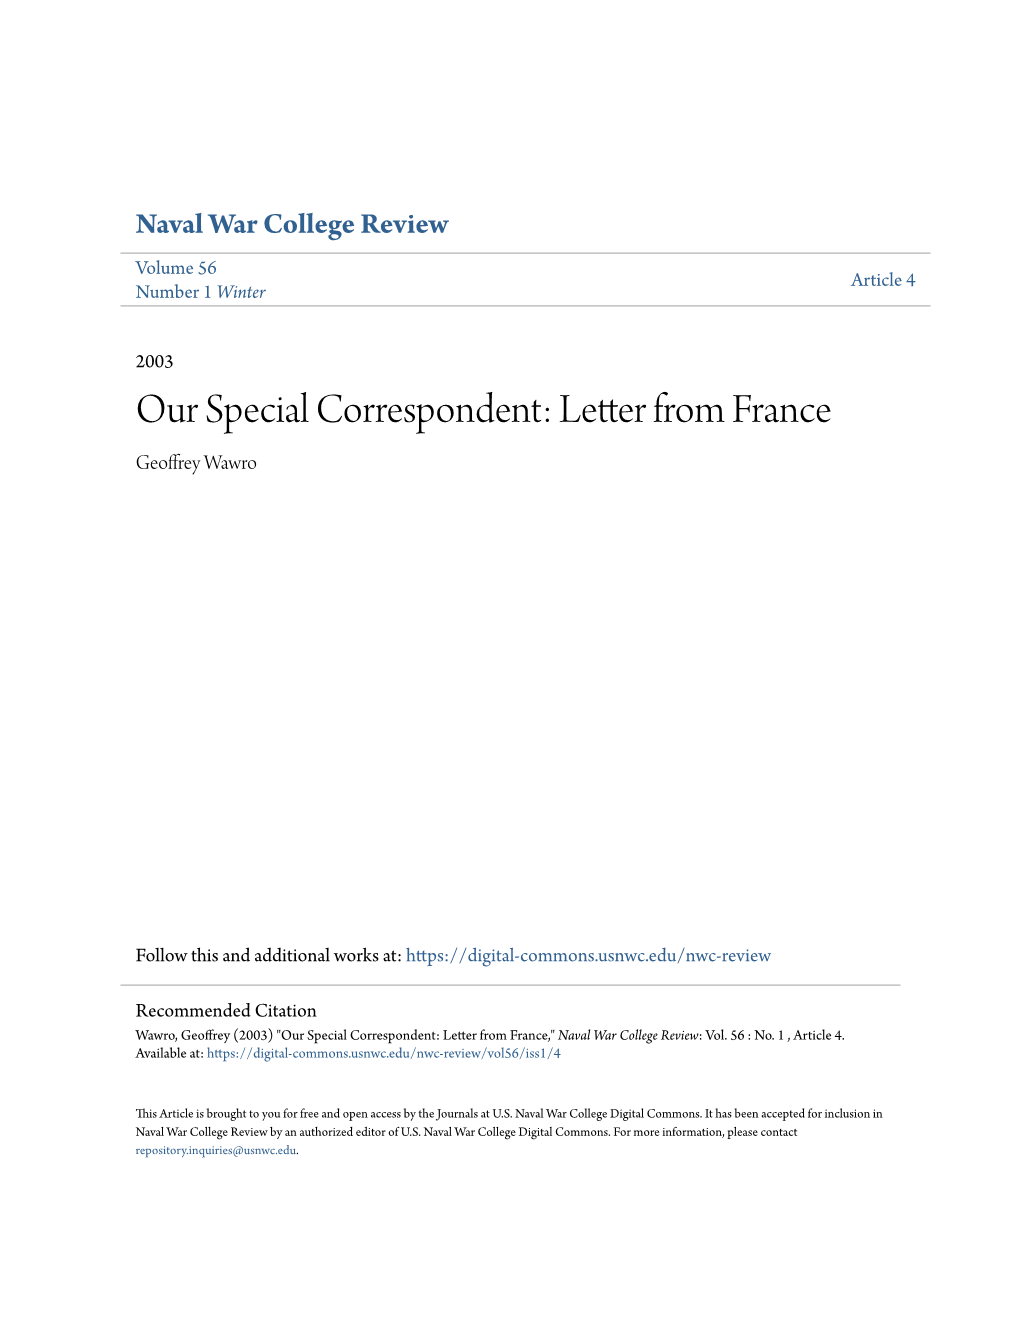 Our Special Correspondent: Letter from France Geoffrey Wawro